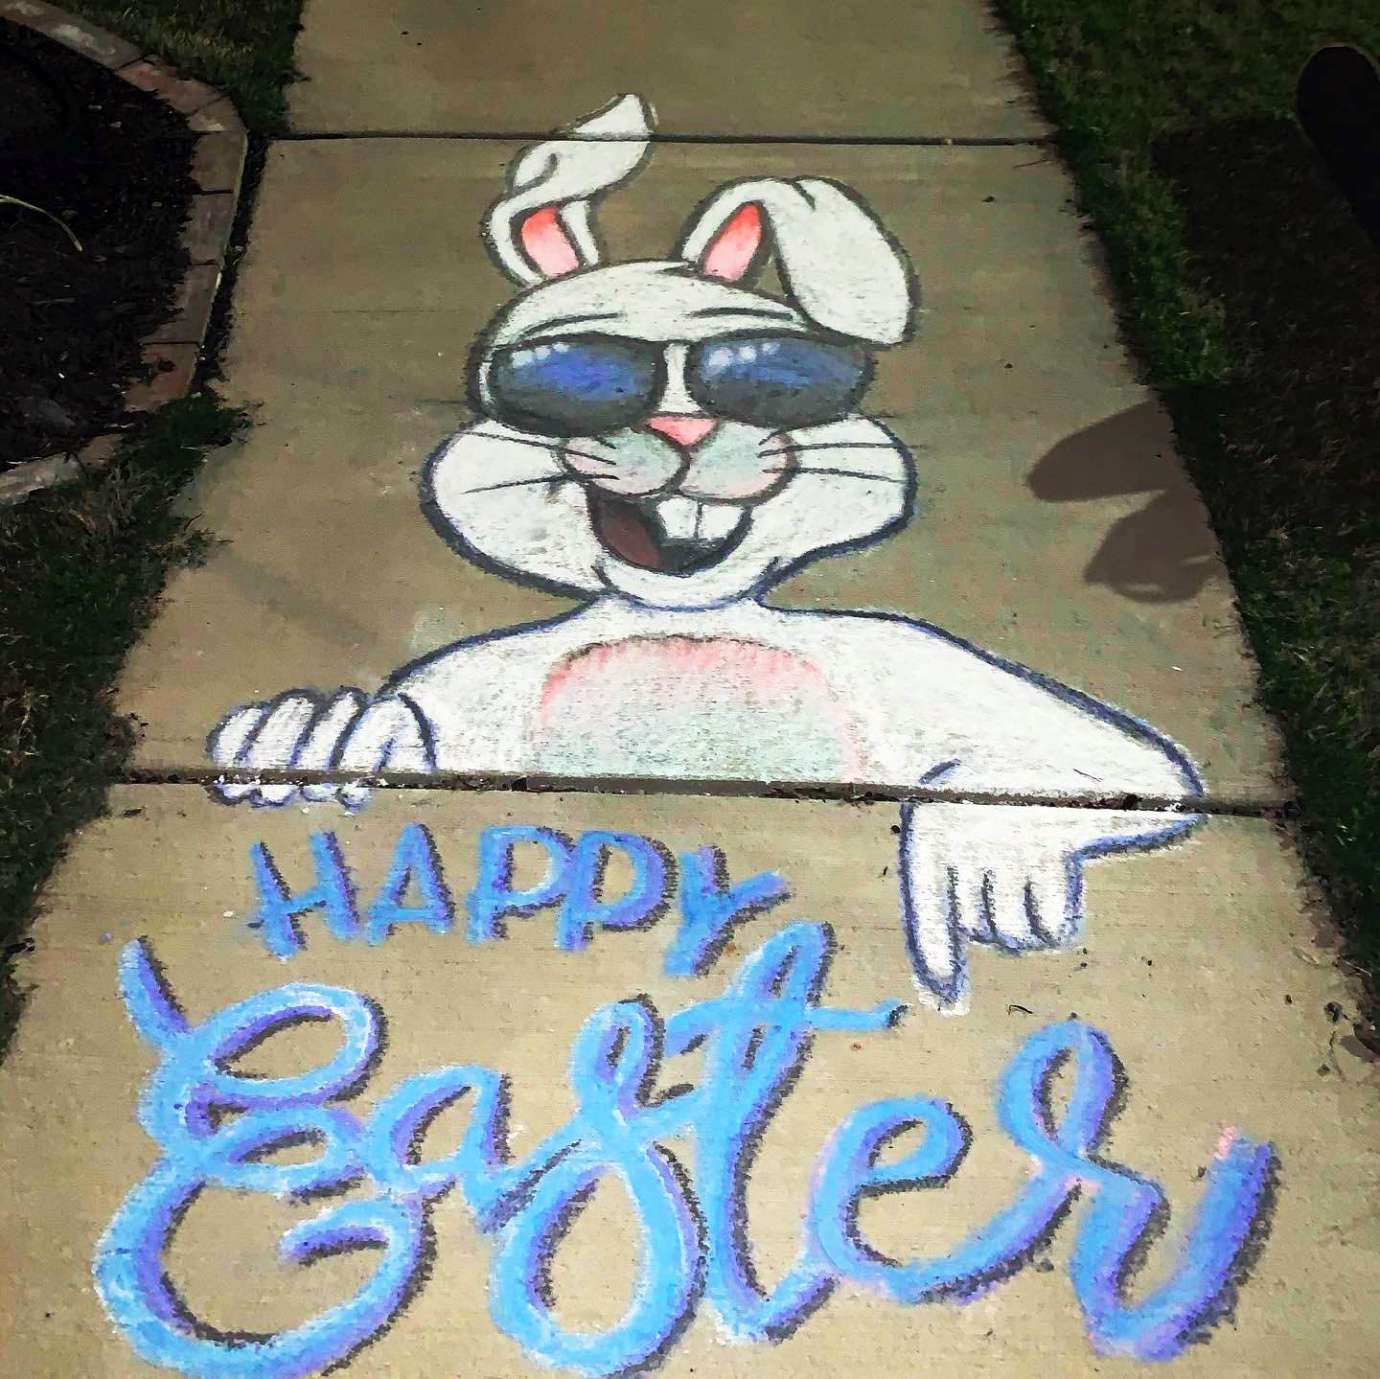 A sidewalk chalk drawing of a white rabbit with sunglasses on and the words "Happy Easter"